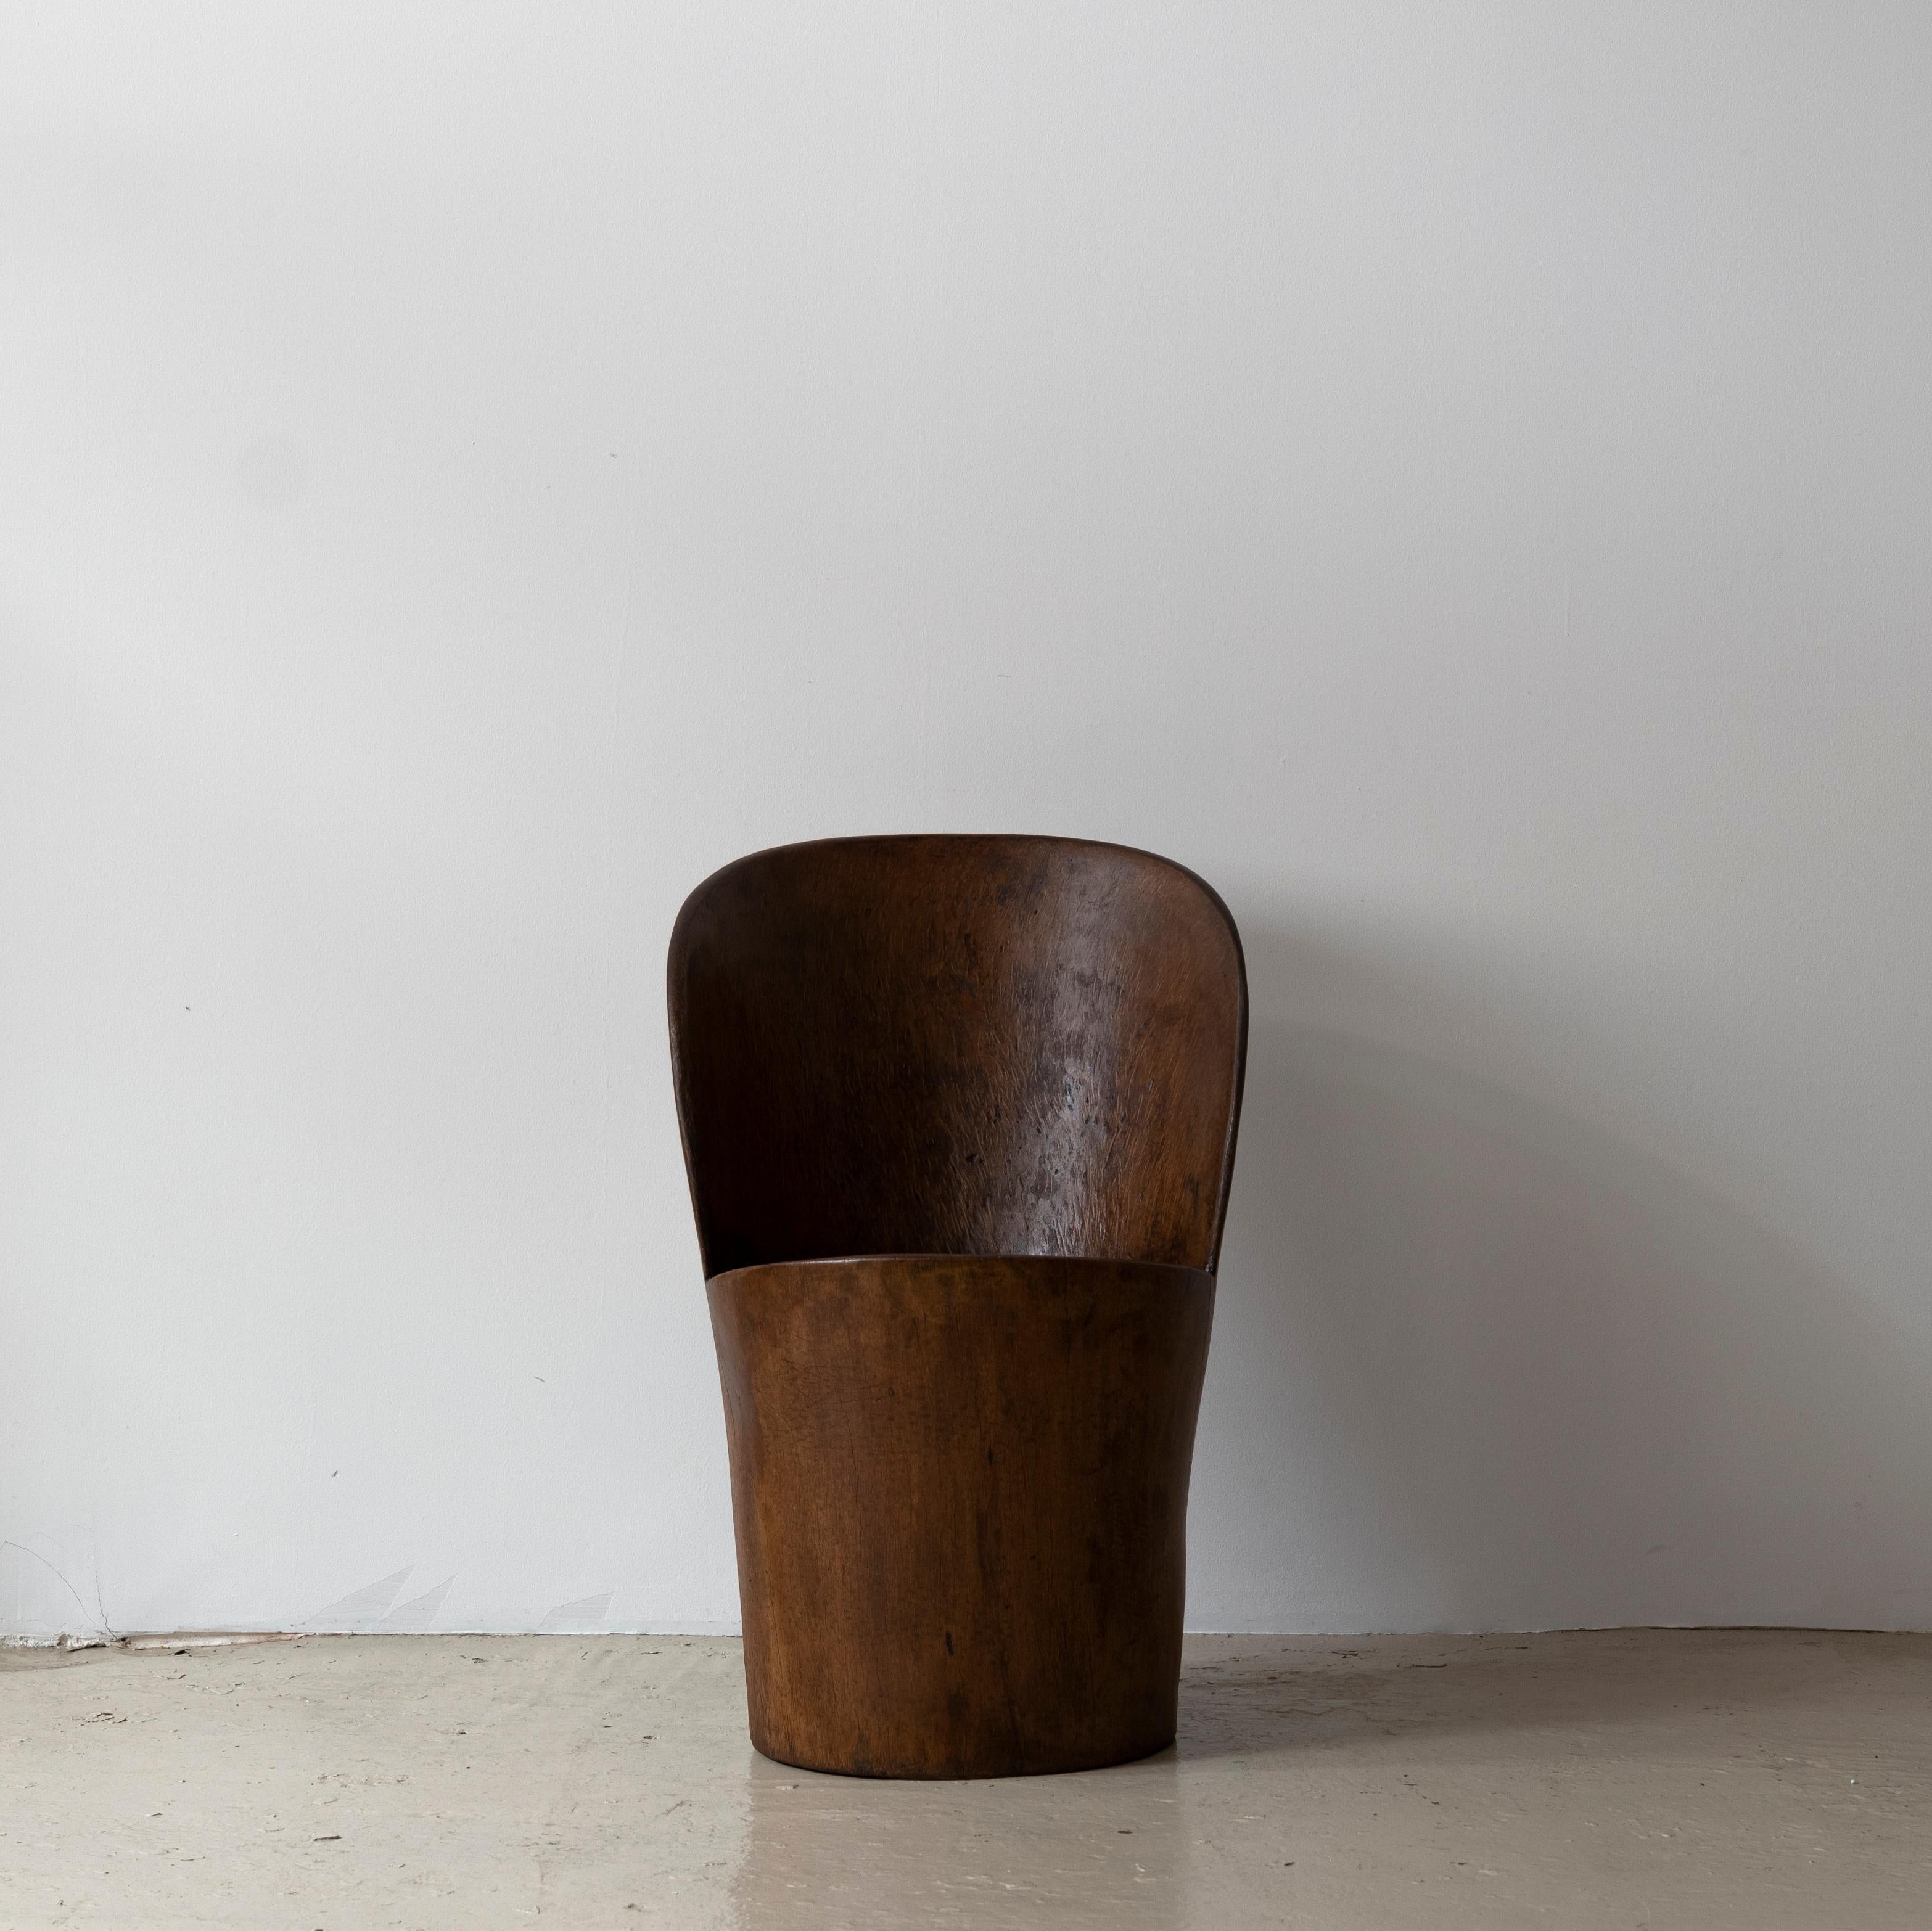 Hand-sculpted chair by José Zanine Caldas, Circa 1970s.

This chair was made of Brazilian hard wood. Signed 